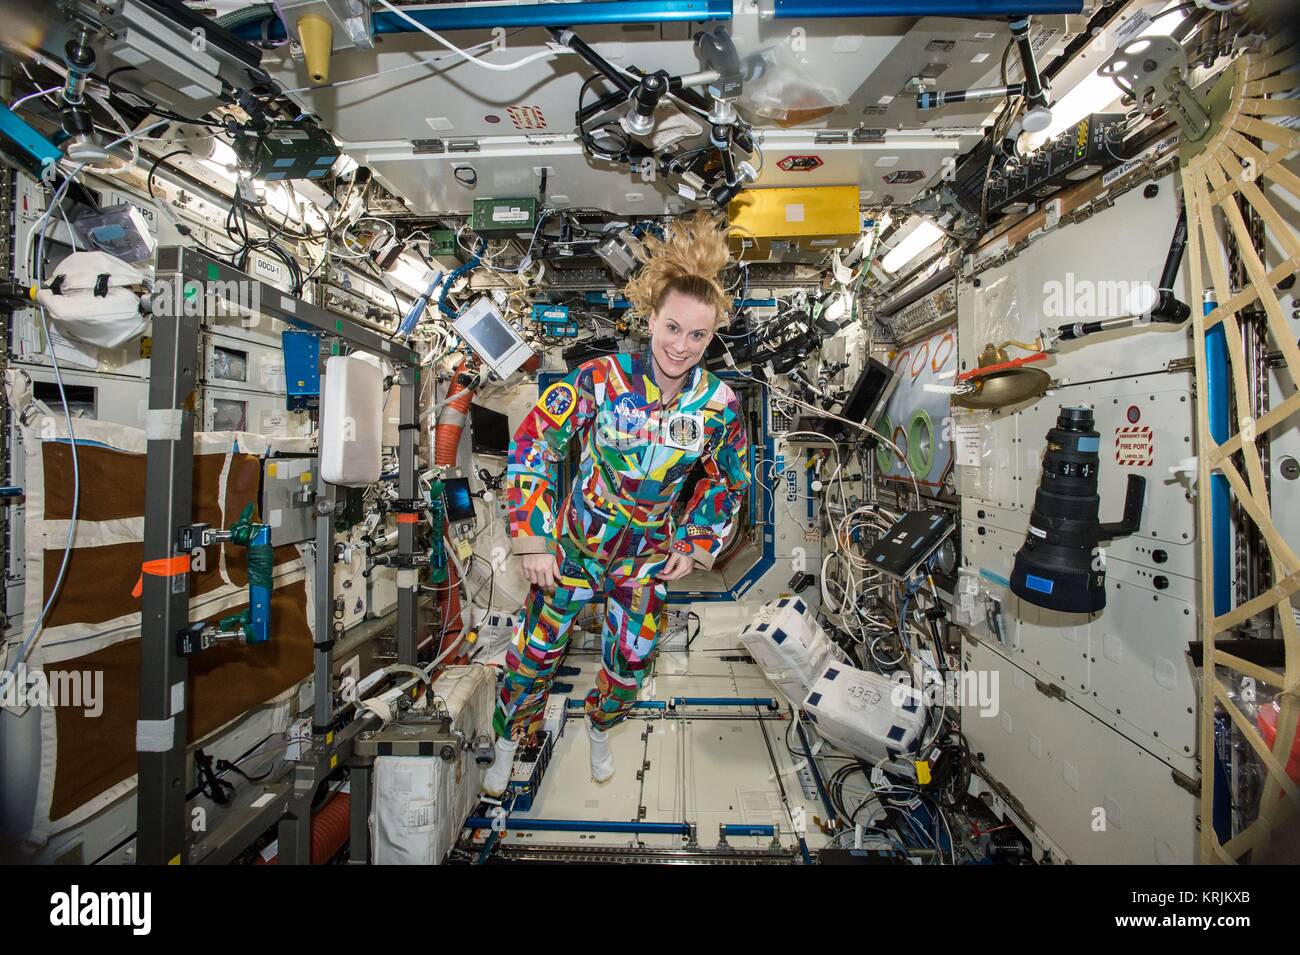 NASA International Space Station Expedition 49 prime crew member American astronaut Kate Rubins wears a hand-painted spacesuit decorated by cancer patients at the MD Anderson Cancer Center September 9, 2016 in Earth orbit. Stock Photo